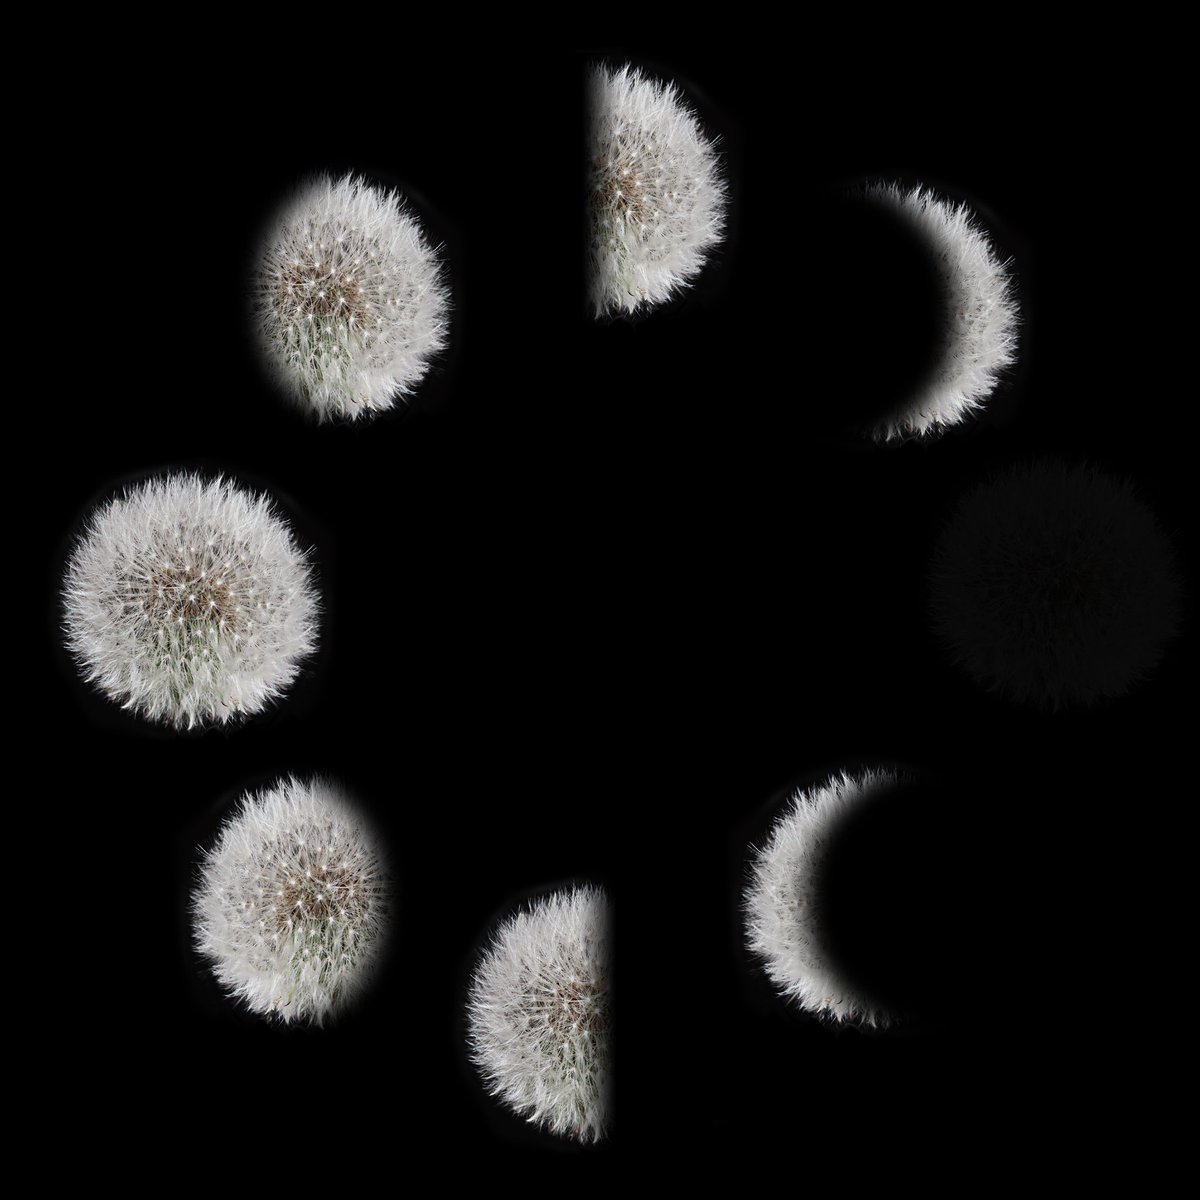 phases of the dandelion This is in my online shop - t-shirt, card, canvas, print microcosmic.shop